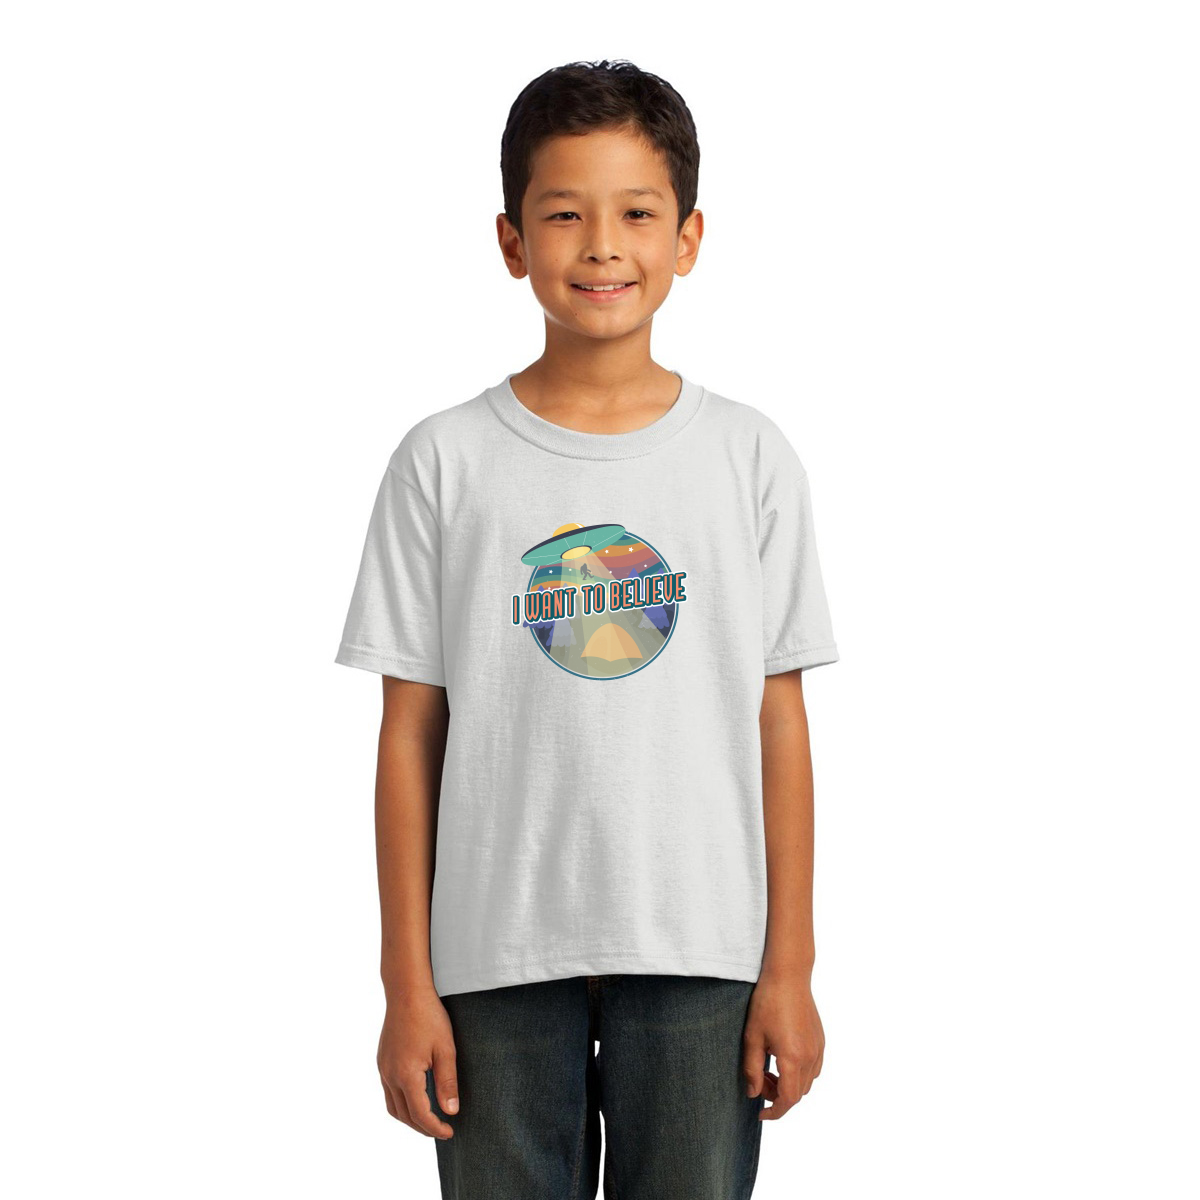 I Want To Believe Kids T-shirt | White